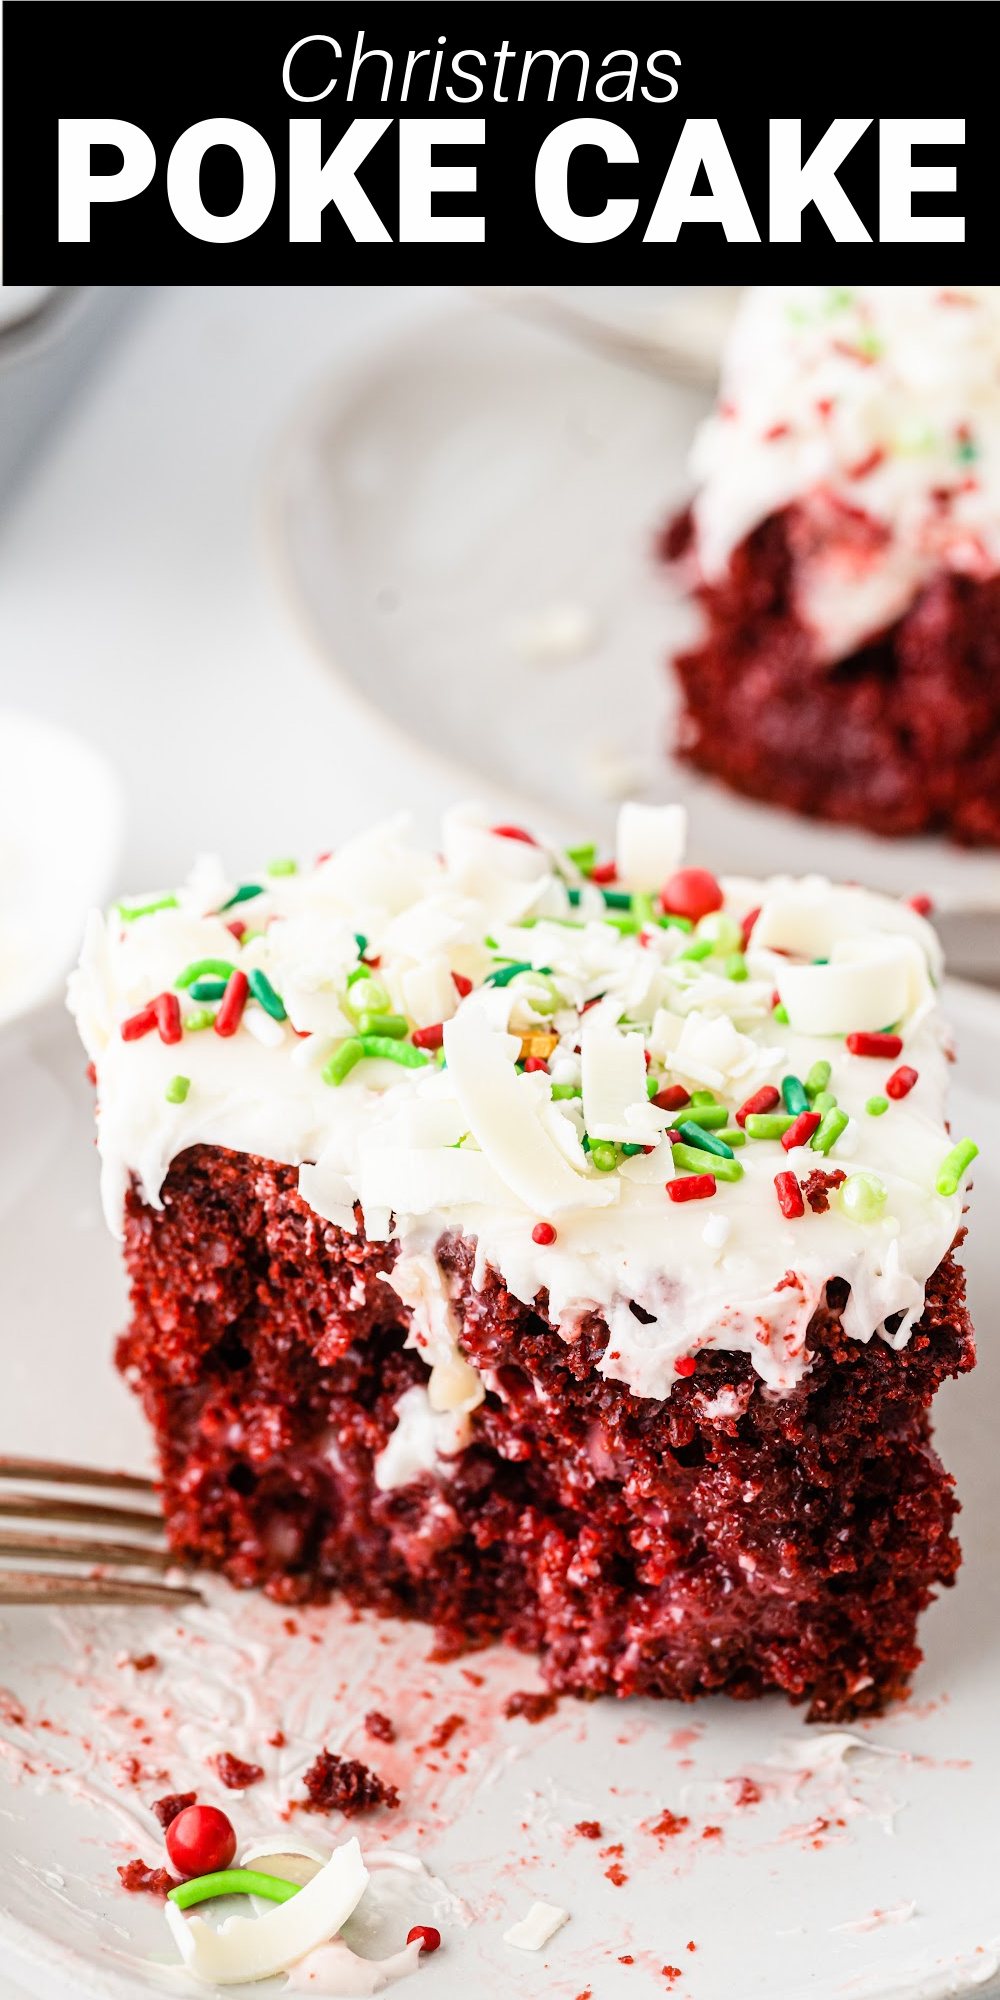 This red velvet Christmas Poke Cake is a fun and easy chocolate holiday cake filled with white chocolate cream and topped with a thick layer of creamy cream cheese frosting. The red color combined with crisp white frosting and added Christmas sprinkles make a perfect dessert.